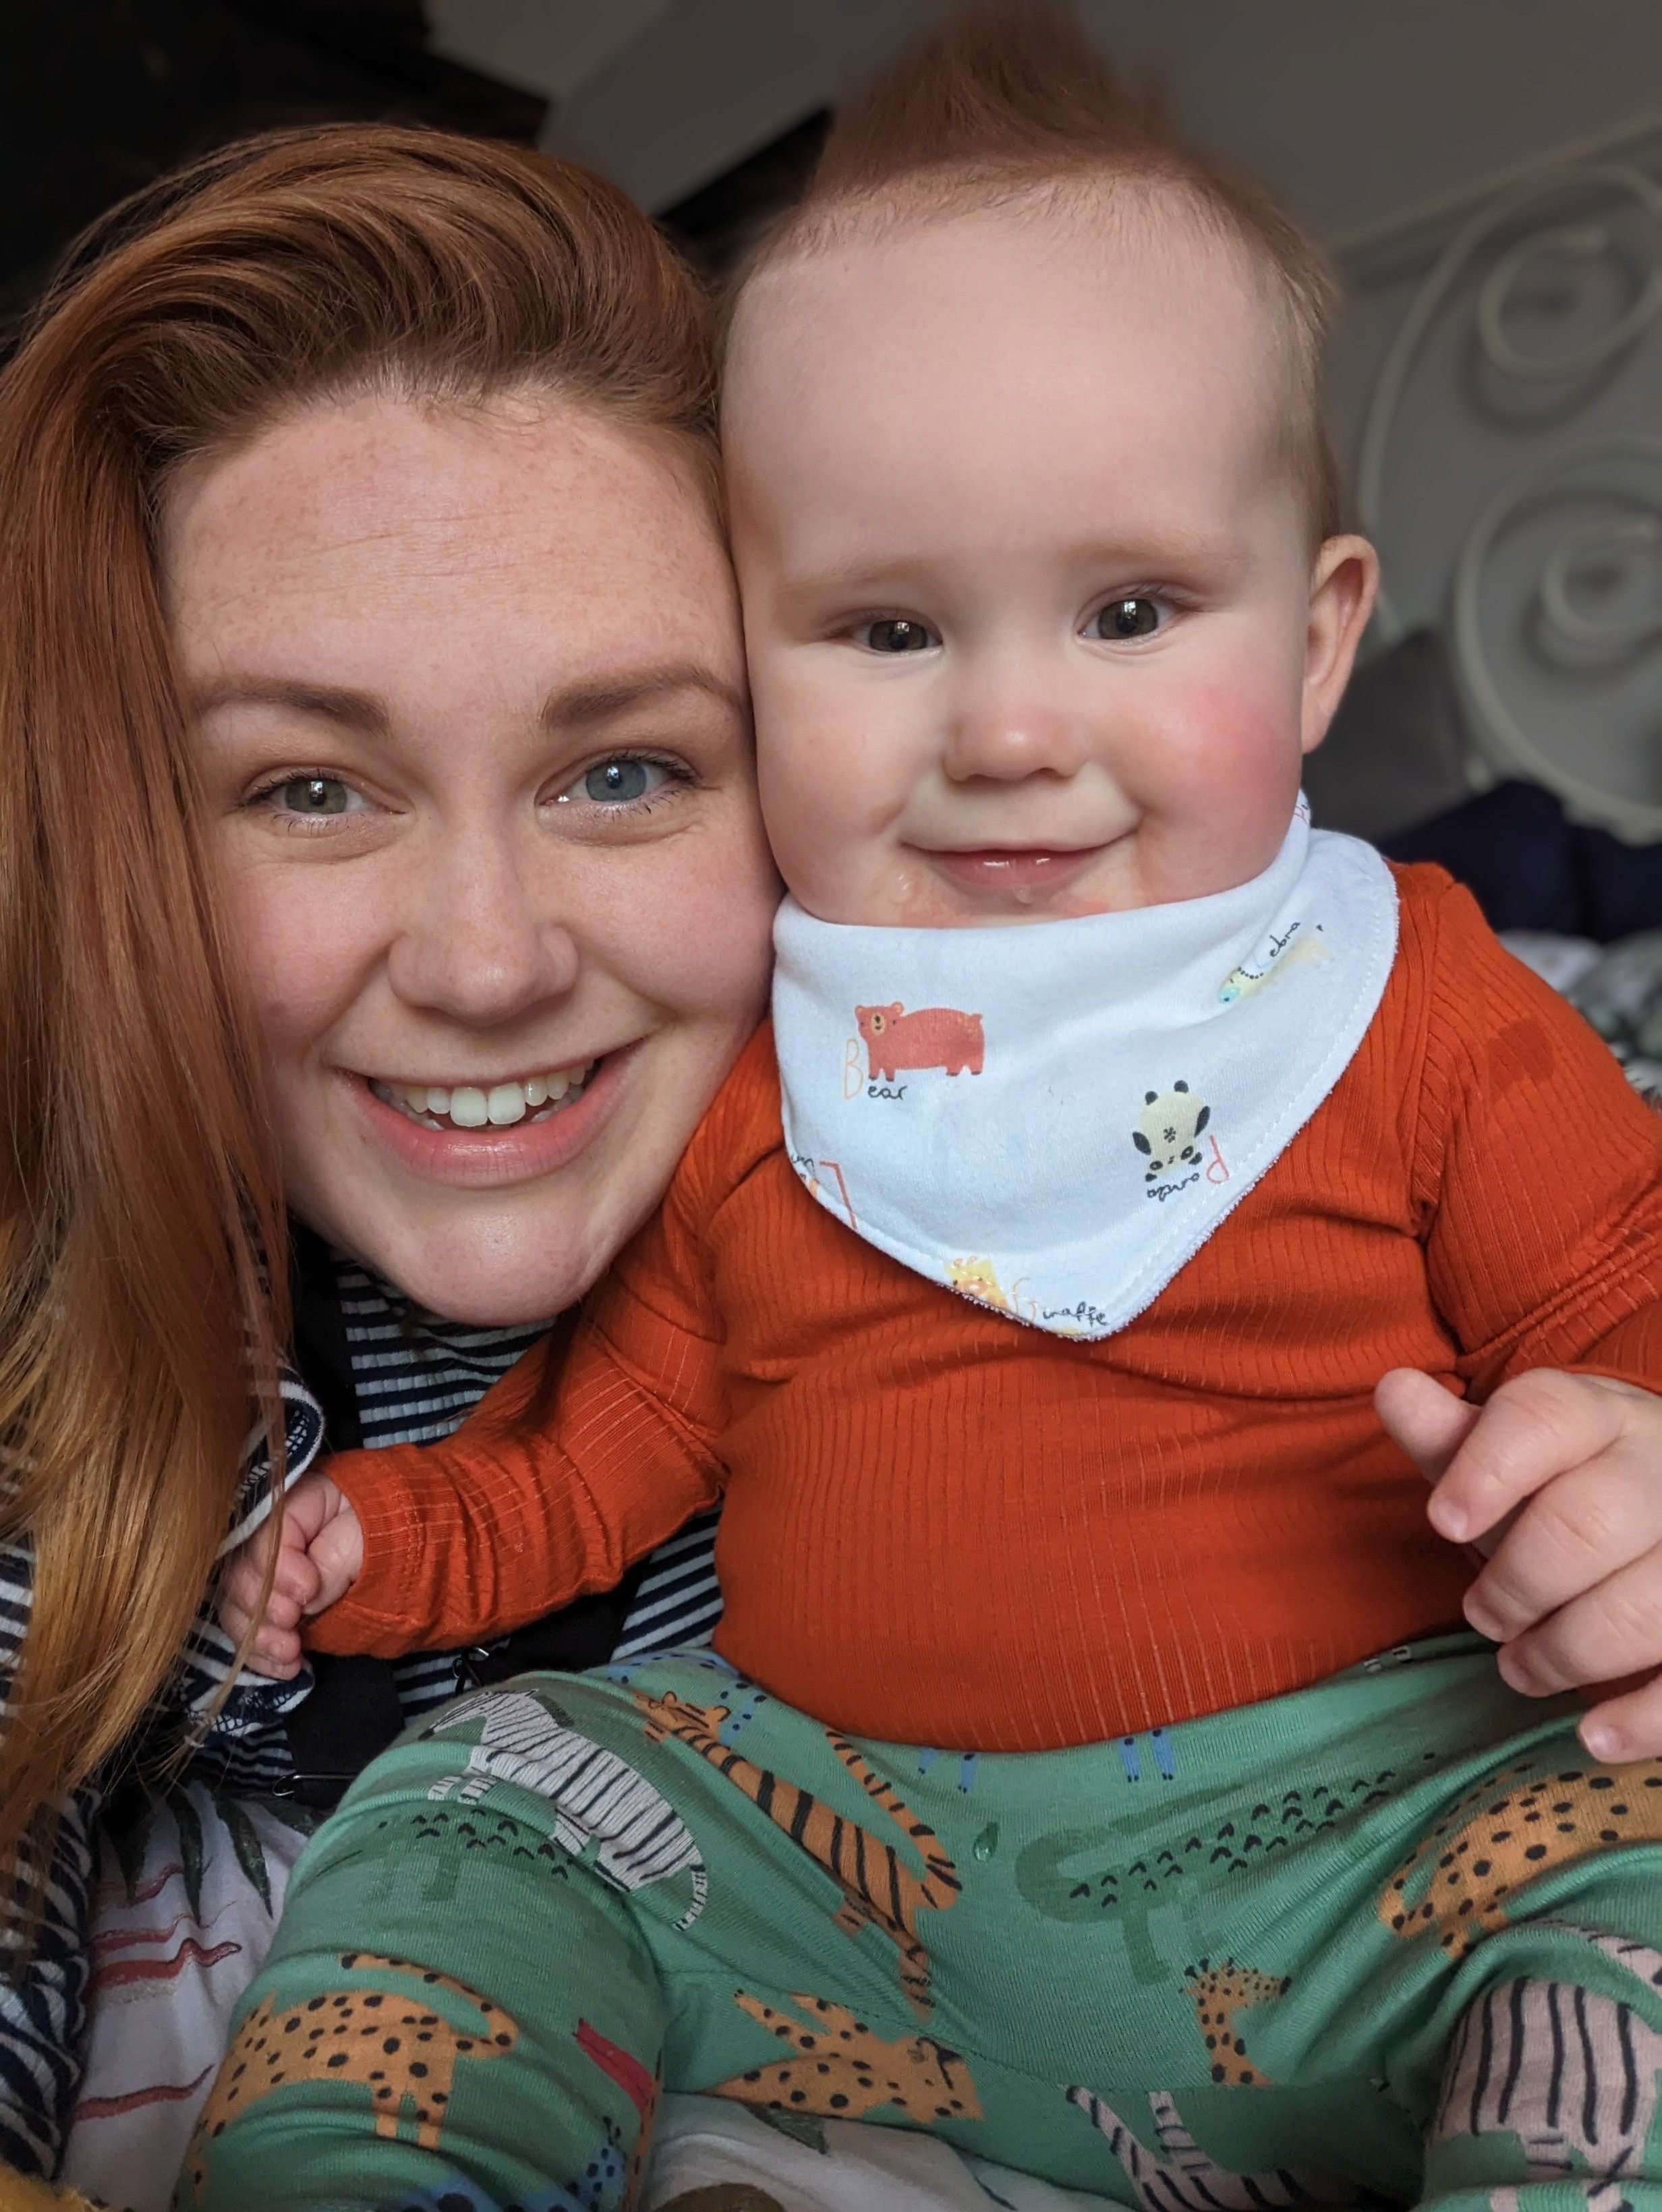 Instagrammer Lizzie Holson wih her son. Comforting moments like the ones she posts about are trending on social media, and advocates reveal how they are beneficial to mental health. Photo: Lizzie Holson